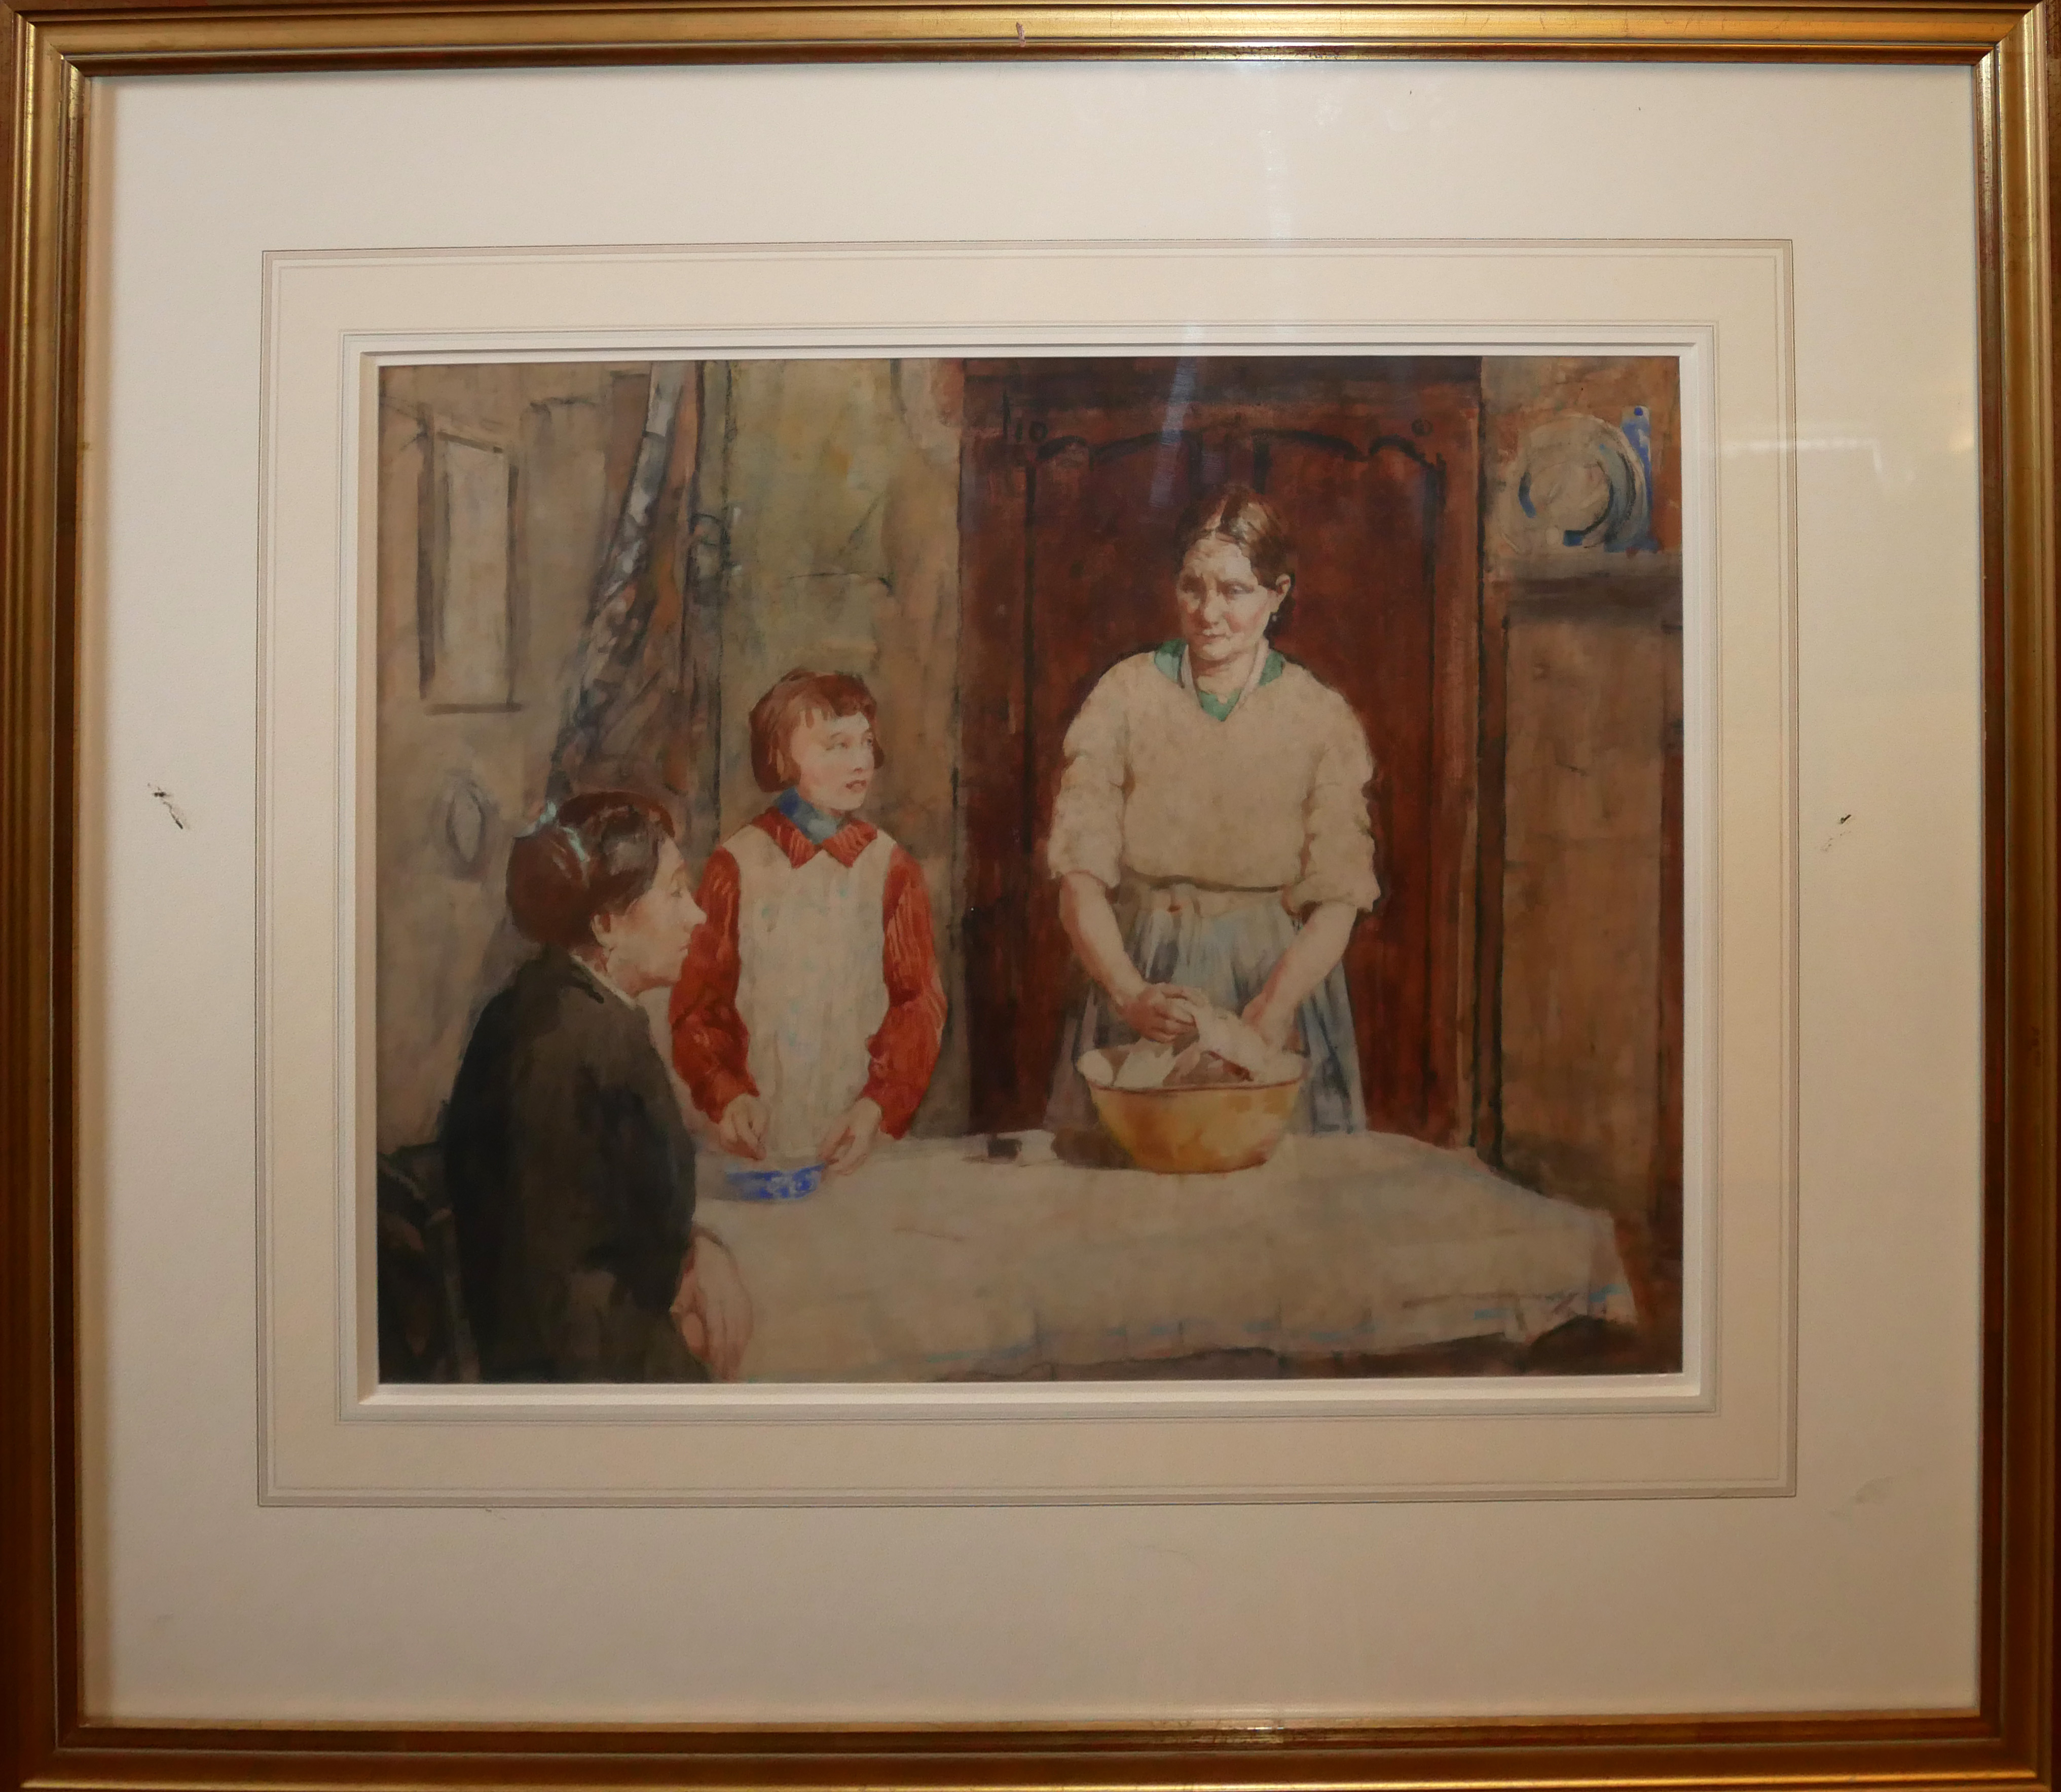 WILLIAM LEE-HANKEY, 1869 - 1952, WATERCOLOUR Titled ‘At The Table’, mother and daughter preparing - Image 2 of 4